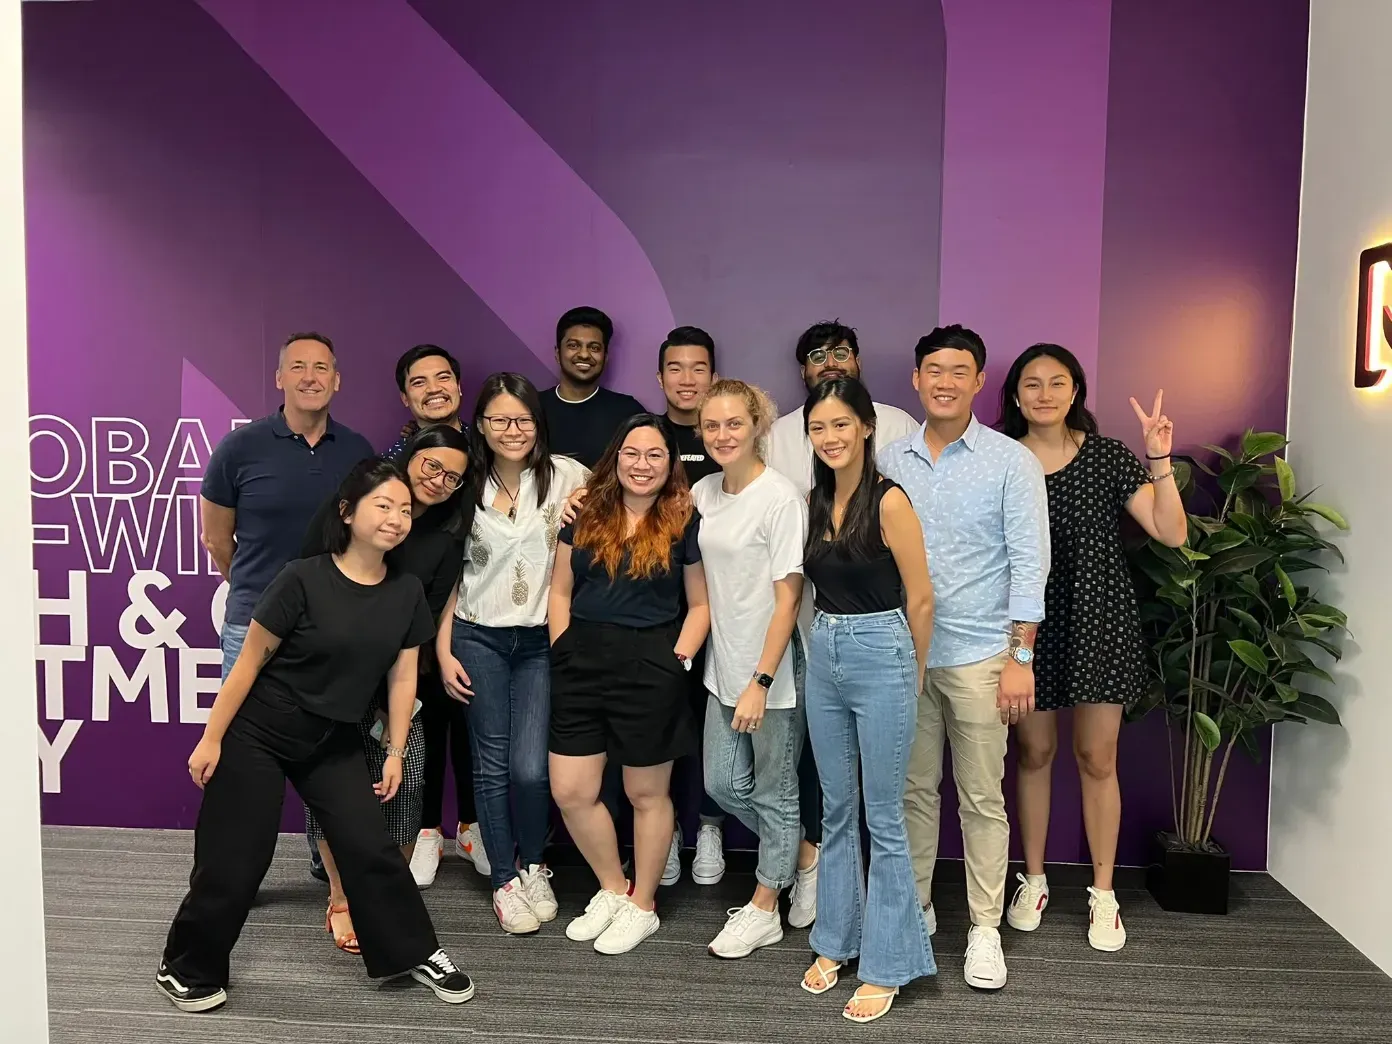 A group of smiling people standing in front of a purple wall dressed casually. 